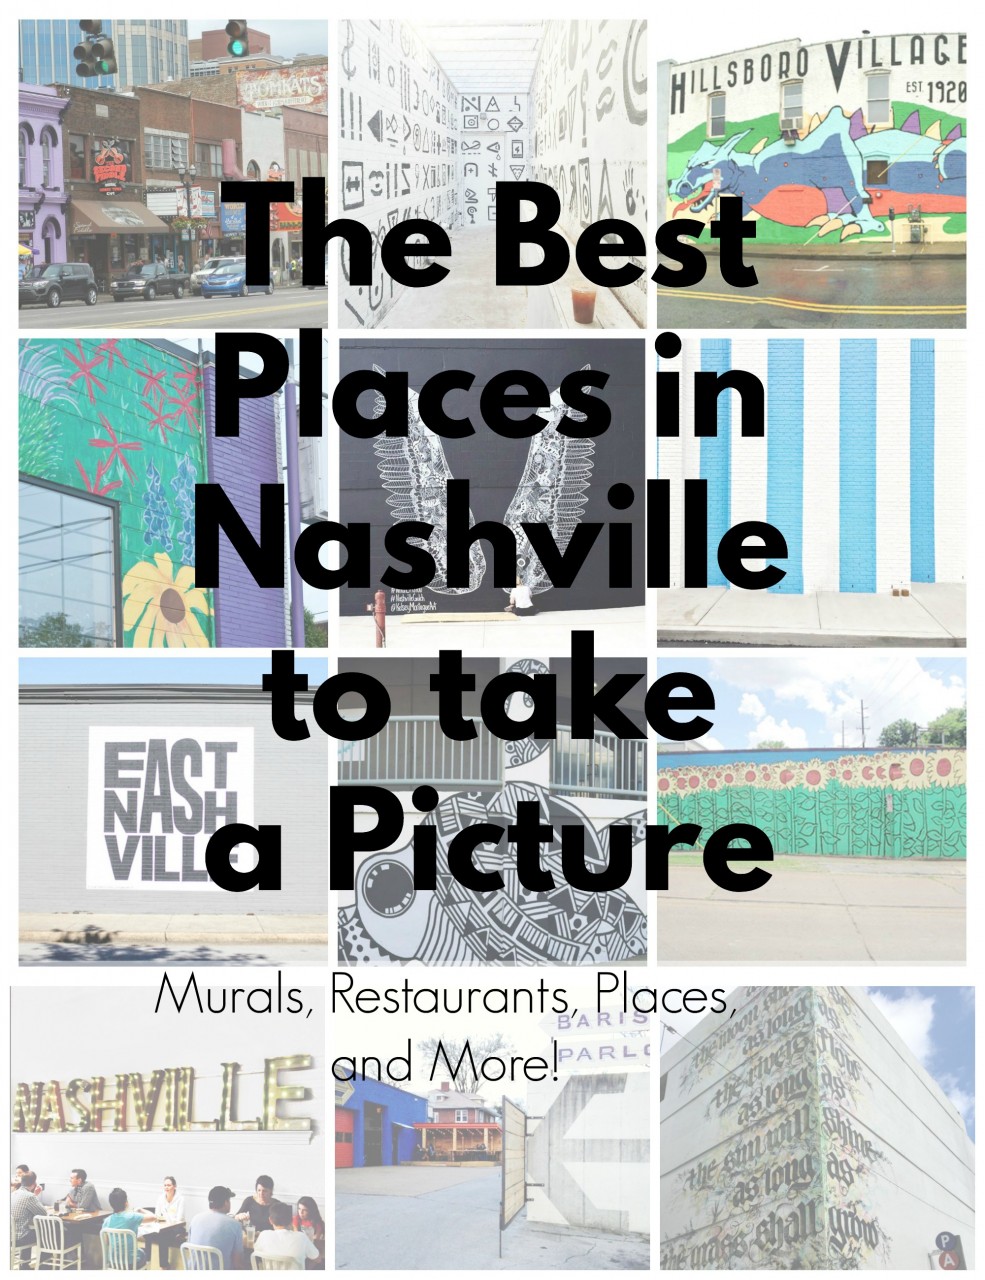 The Best Places in Nashville to Take a Picture